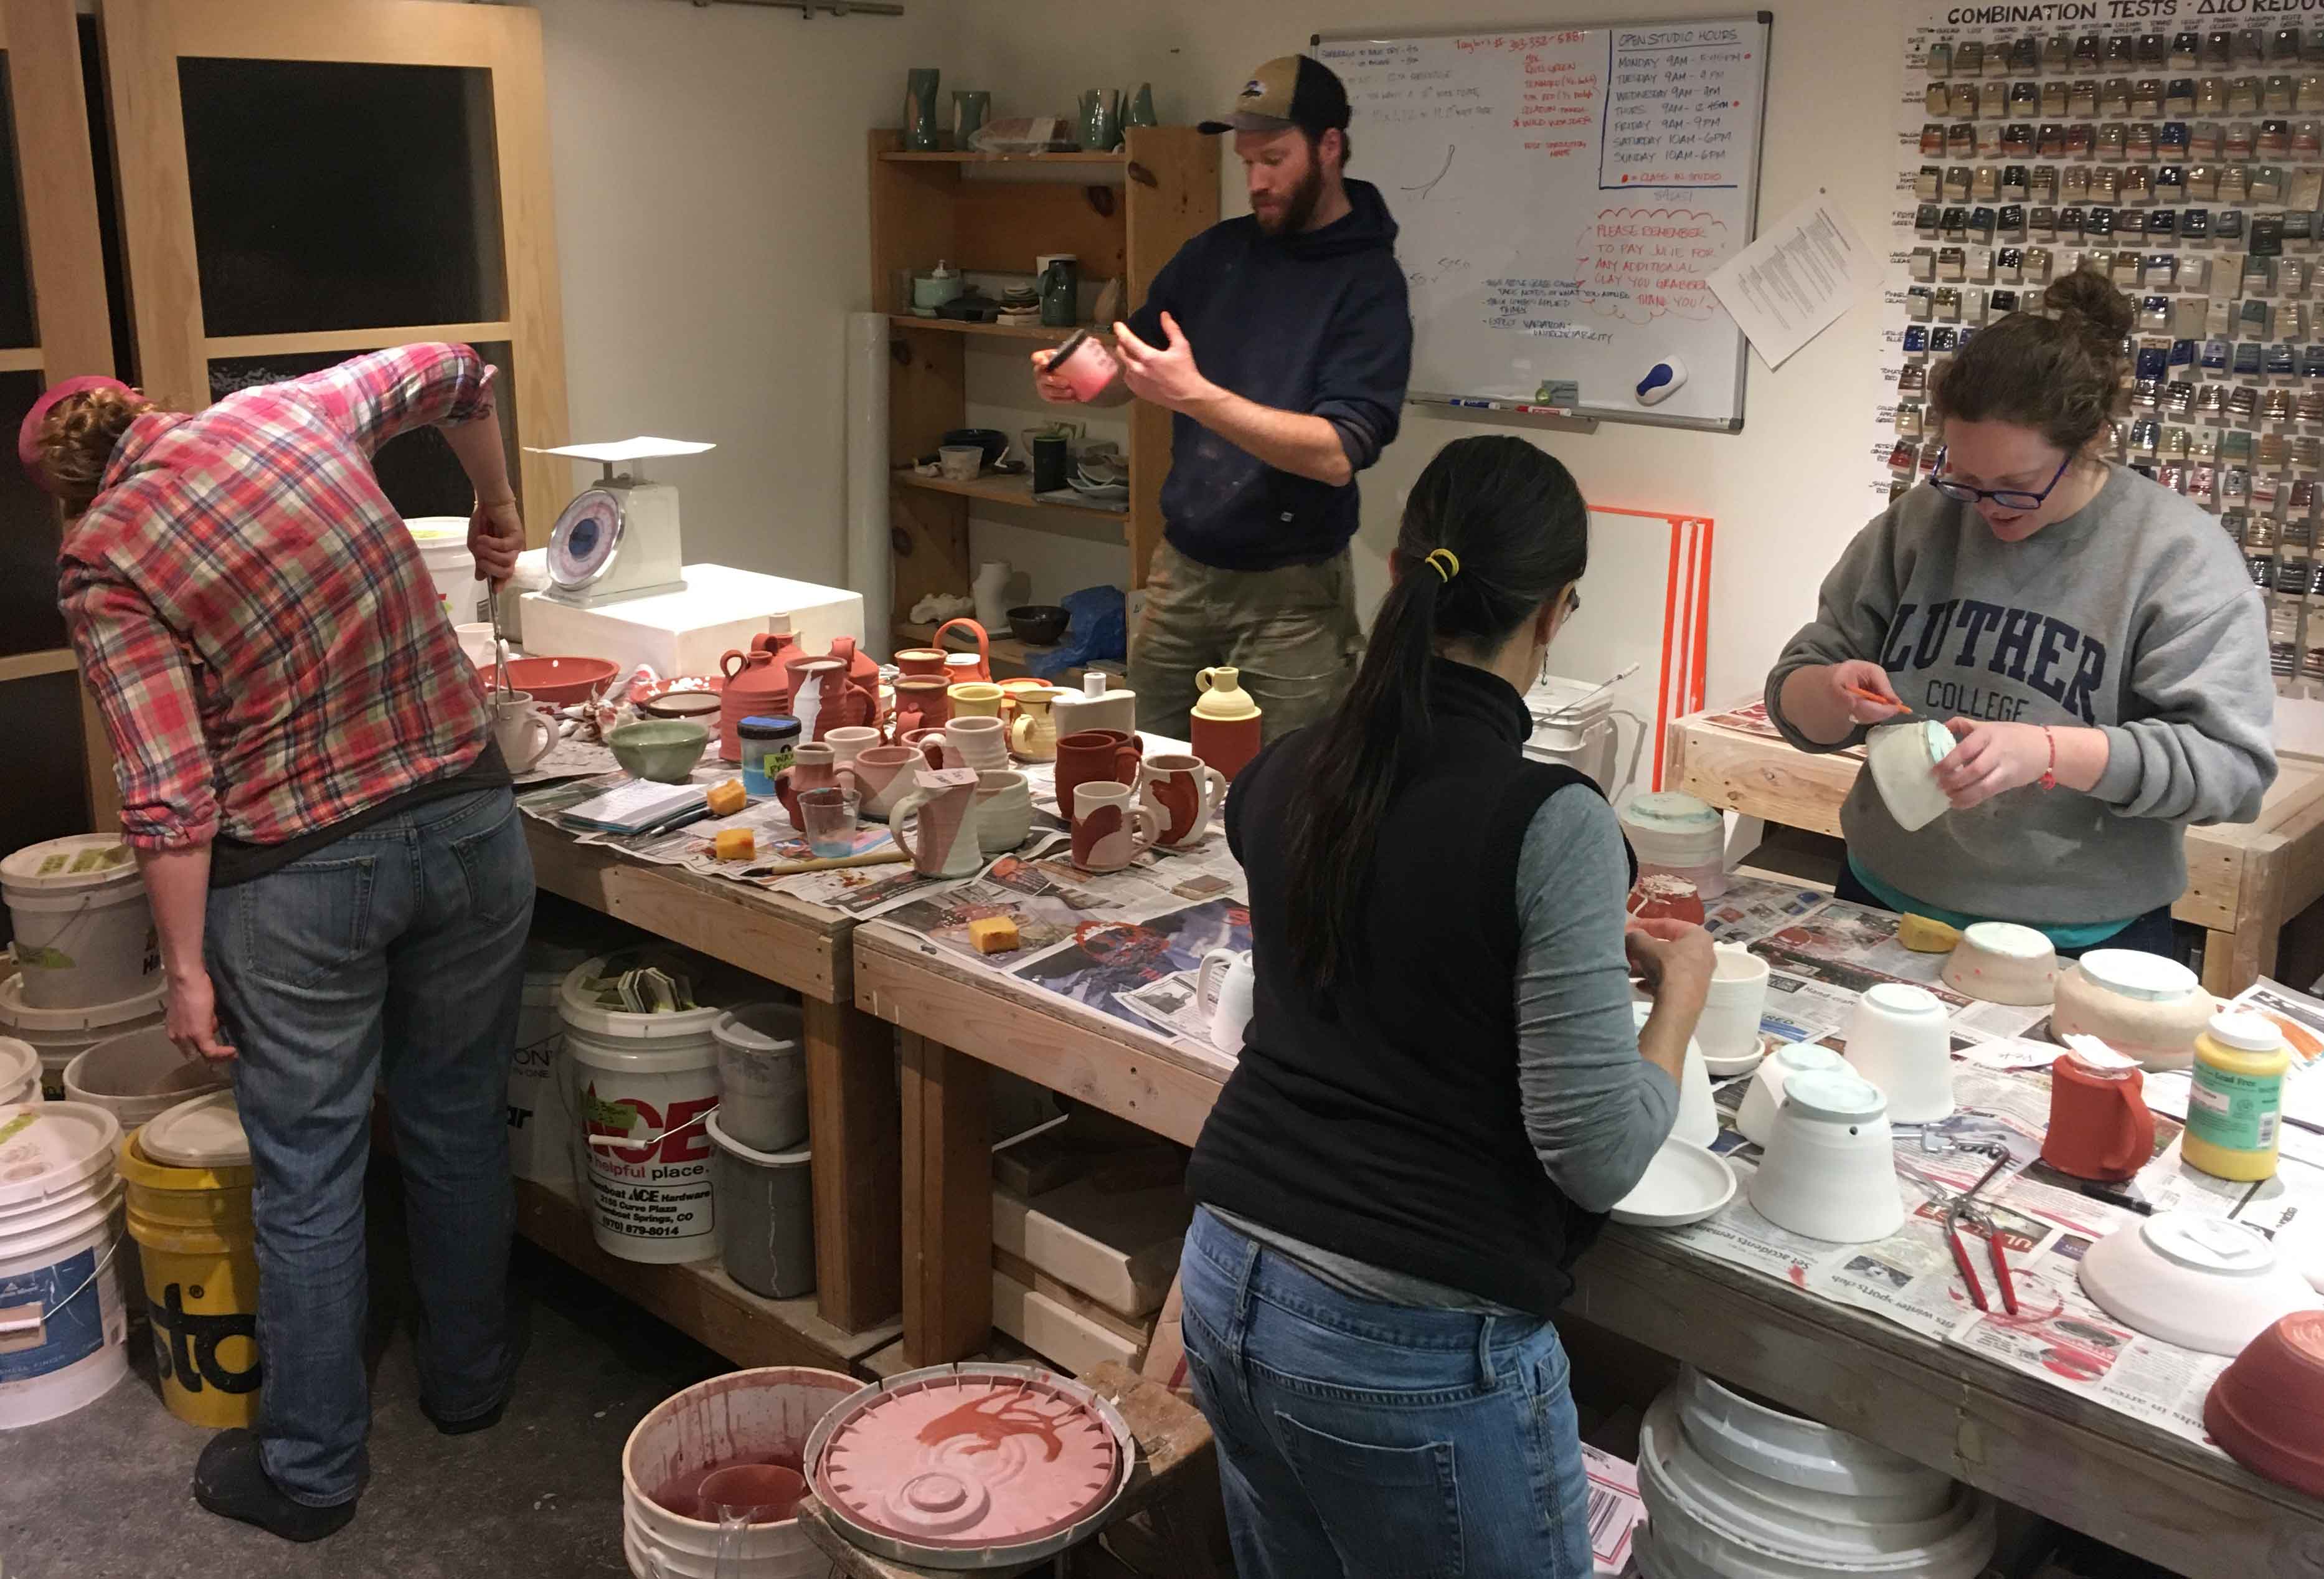 Students glaze their work in the ceramics classroom at Warehome Studios, 2017. 